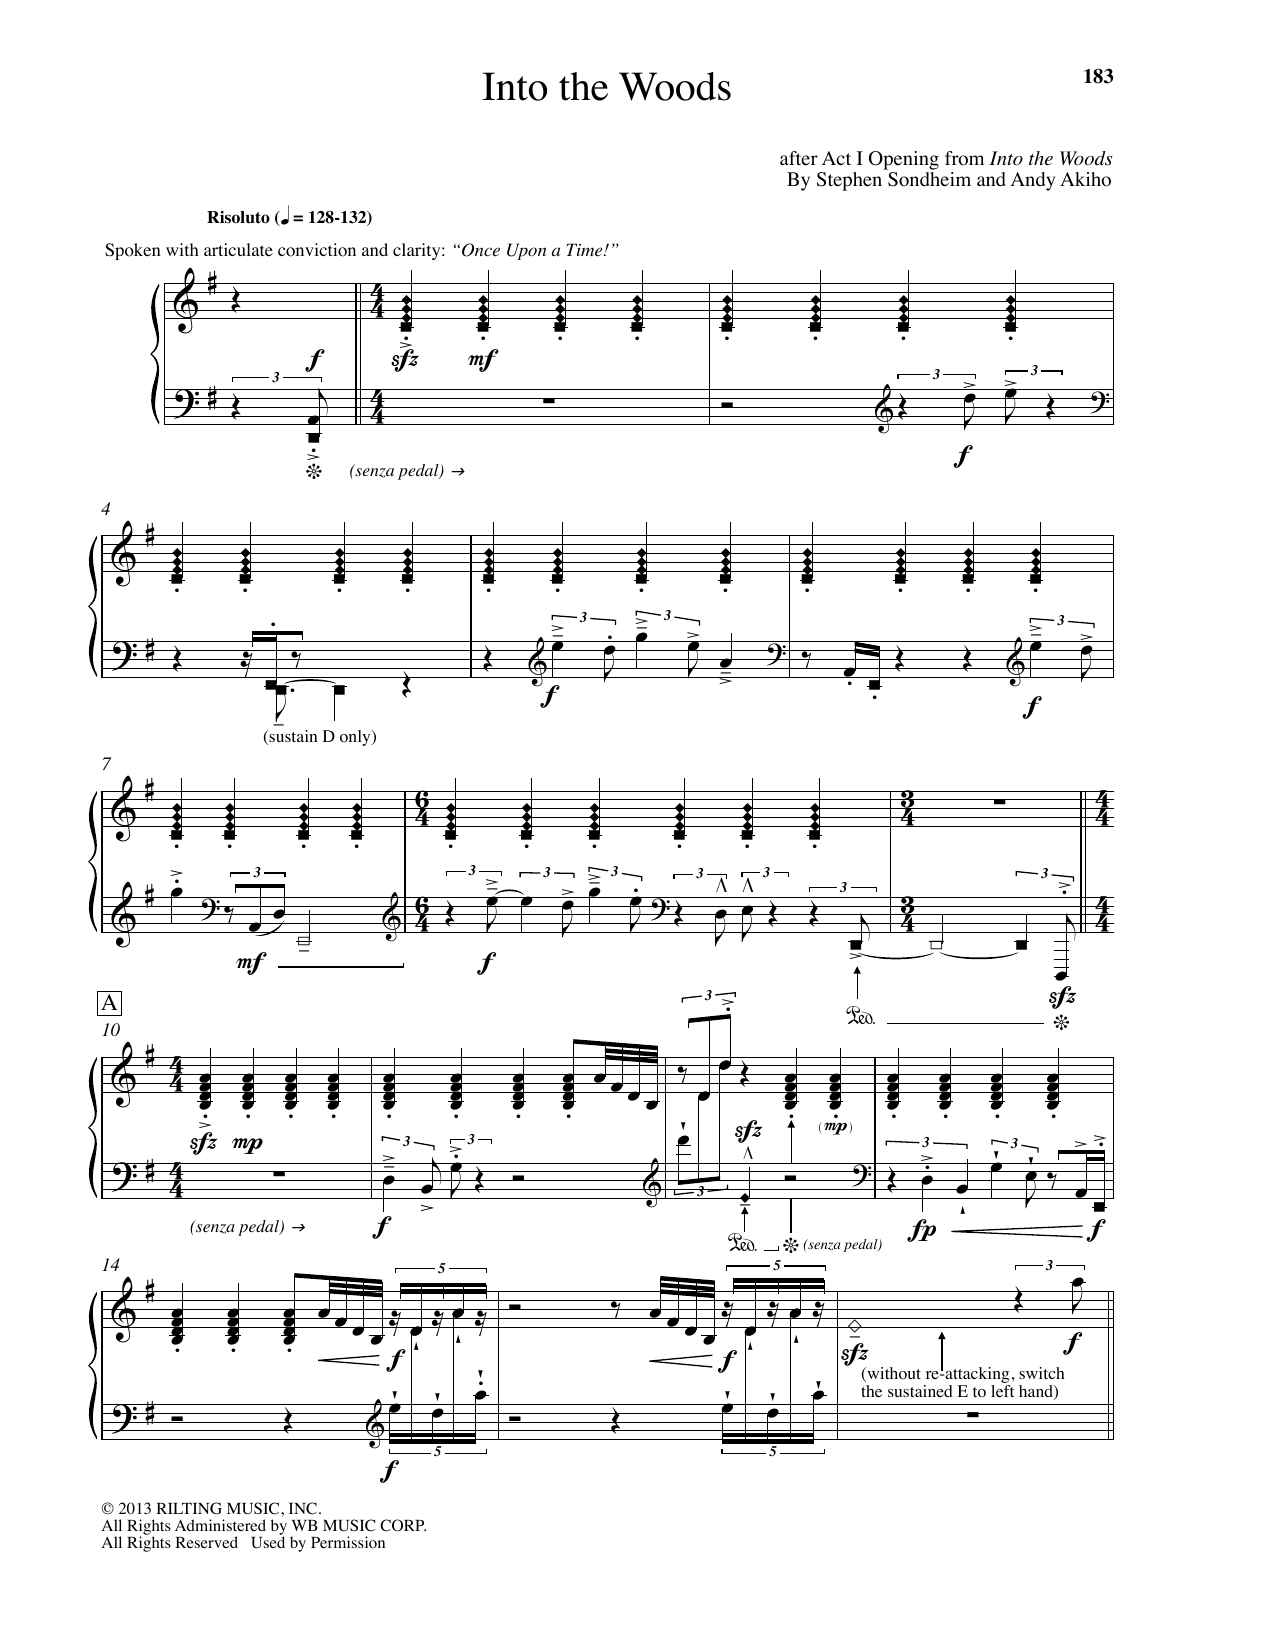 Download Stephen Sondheim Into The Woods (arr. Andy Akiho) Sheet Music